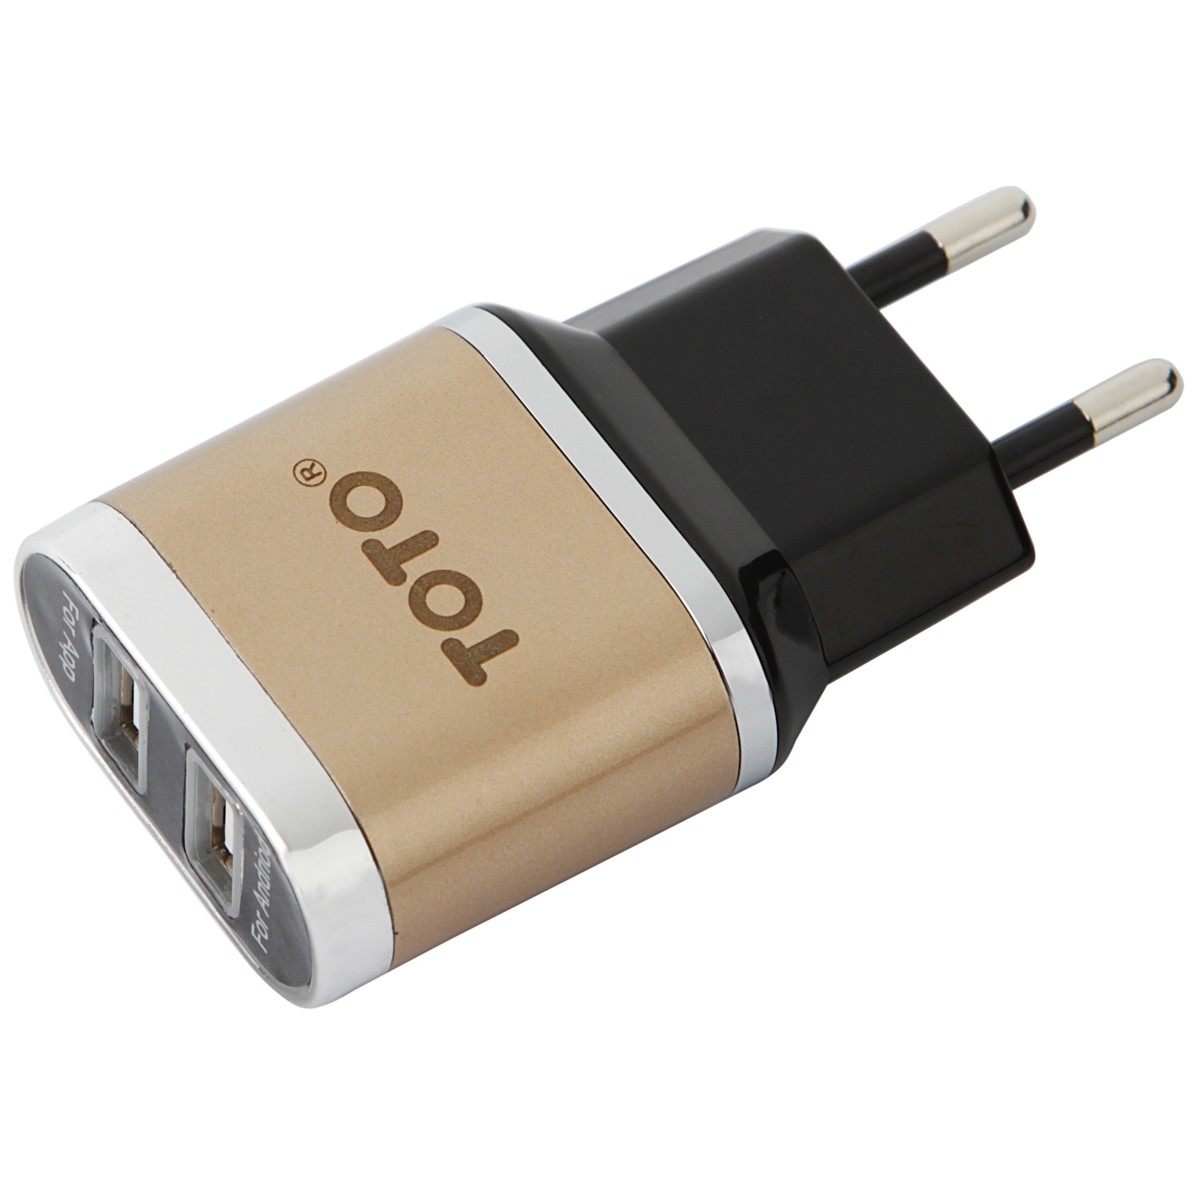 TOTO TZV-41 Led Travel charger 2USB 2,1A Gold - зображення 1